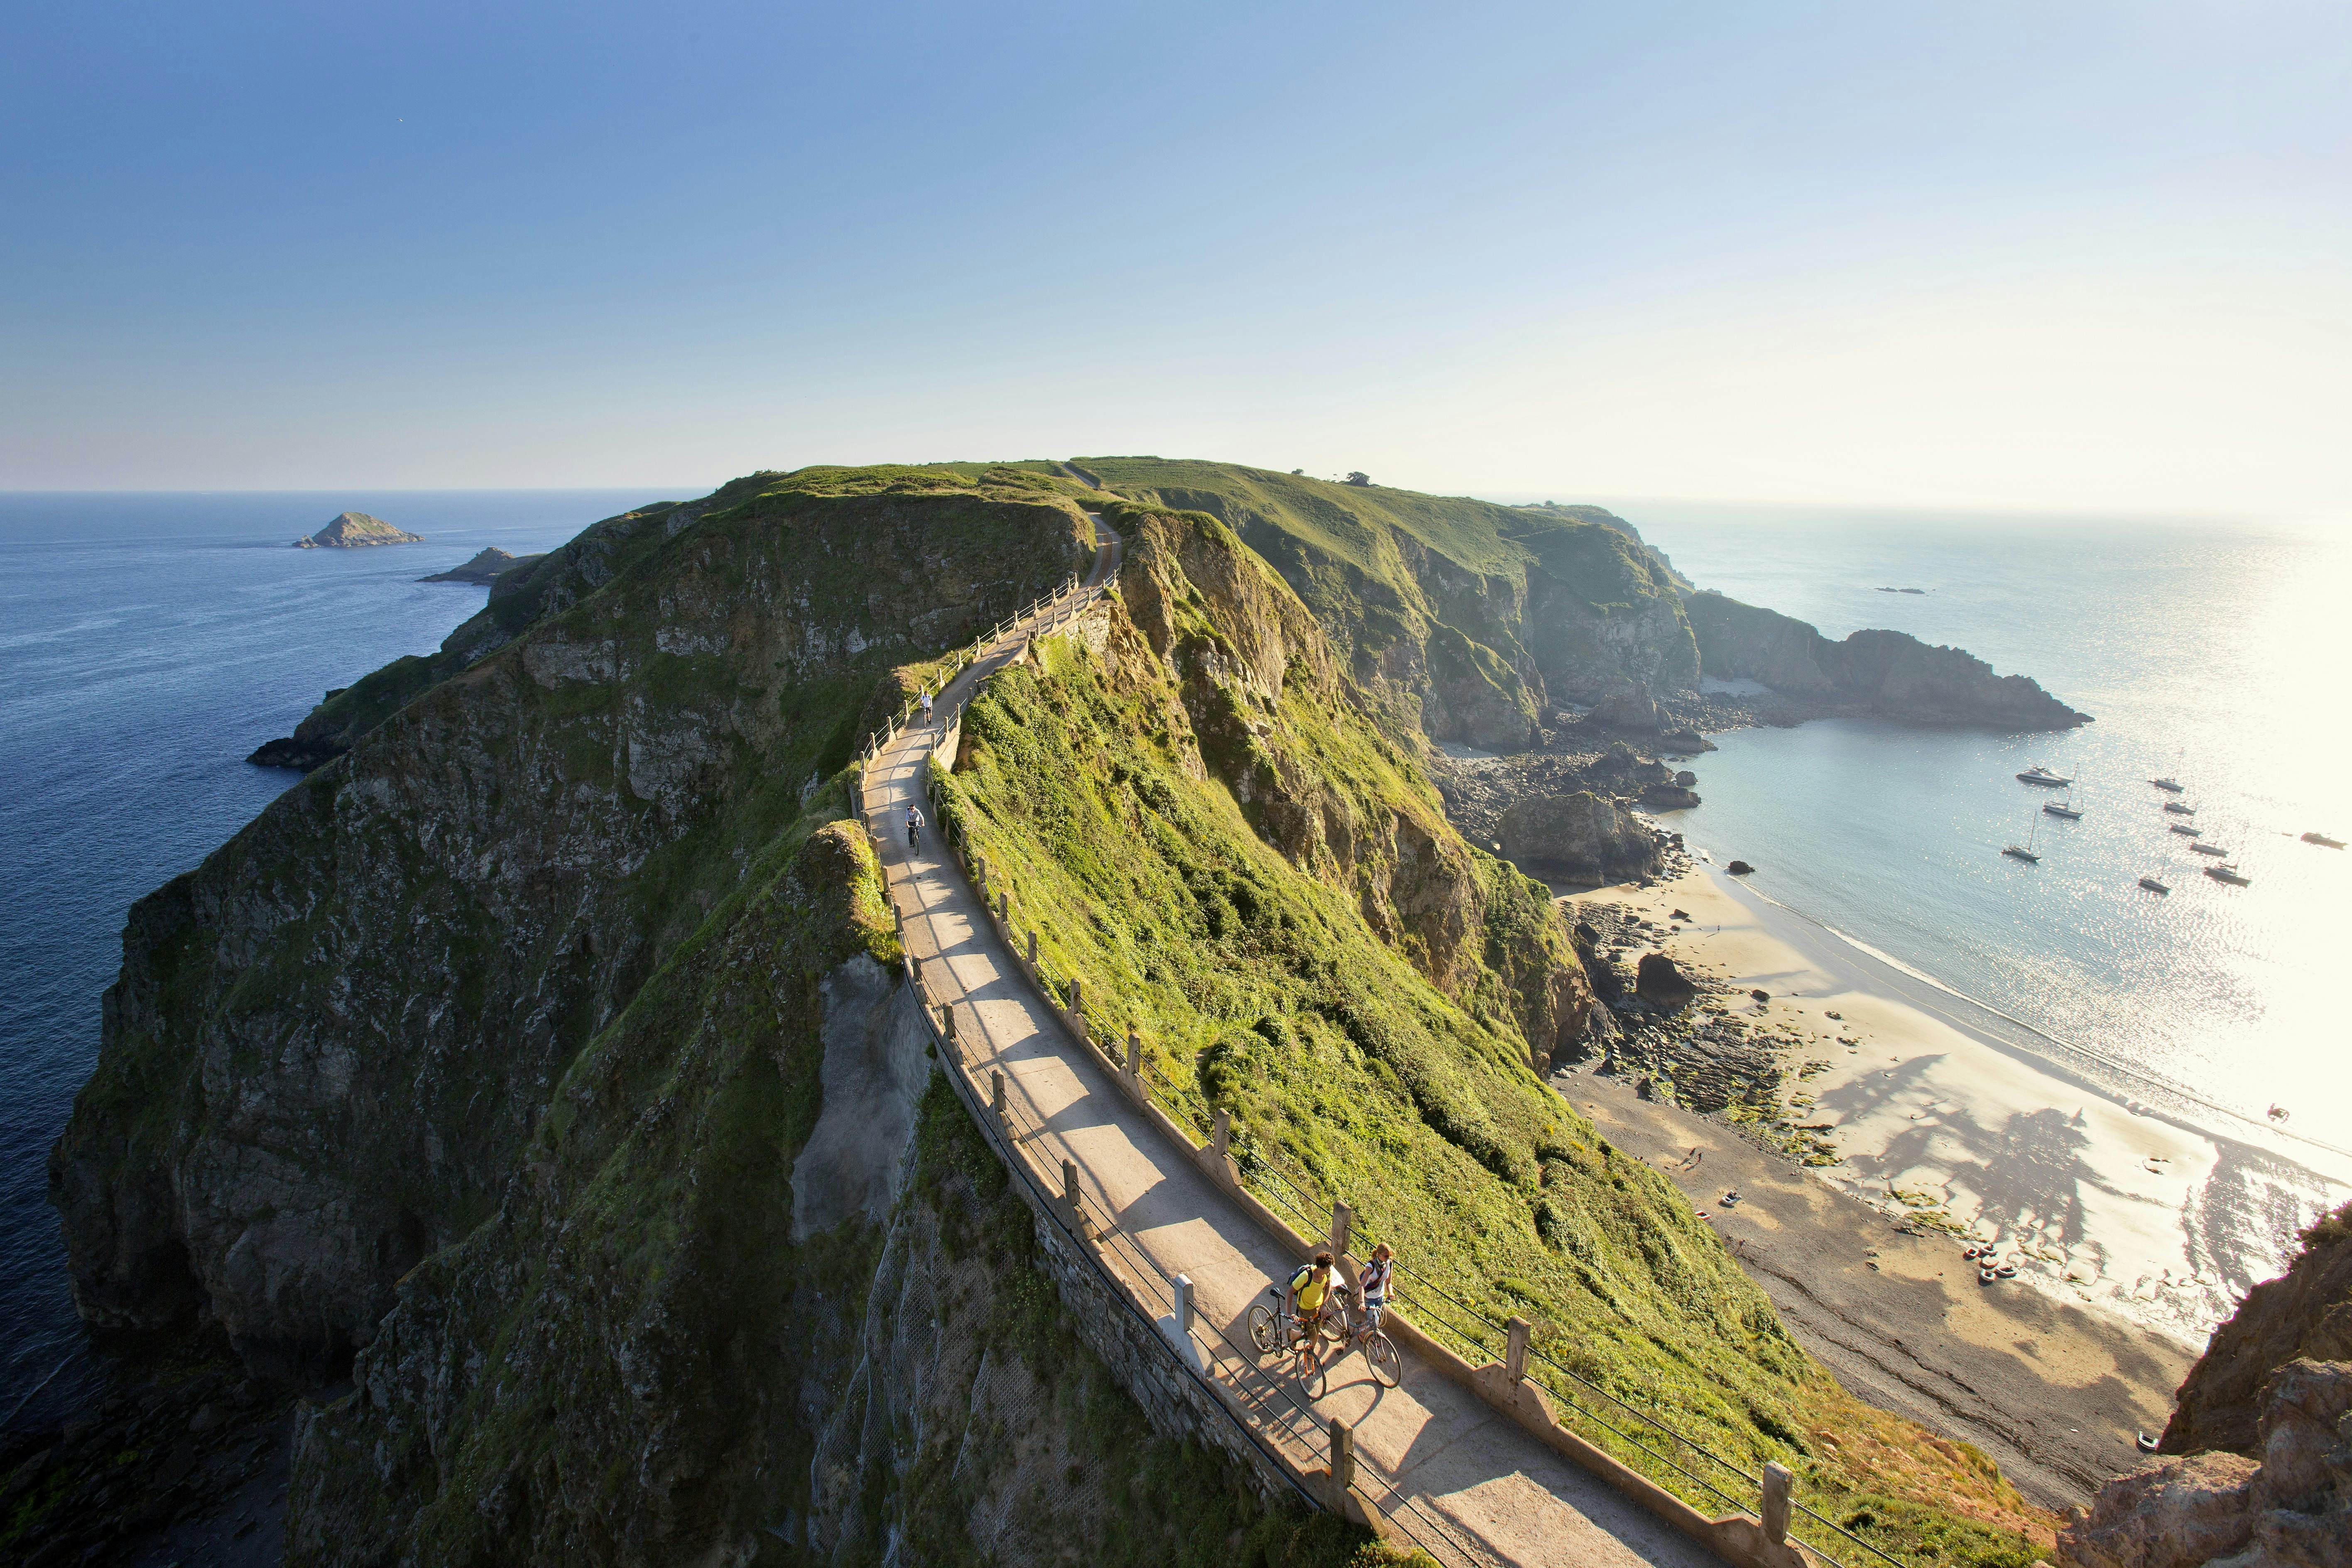 Channel Islands travel guide: everything you need to know